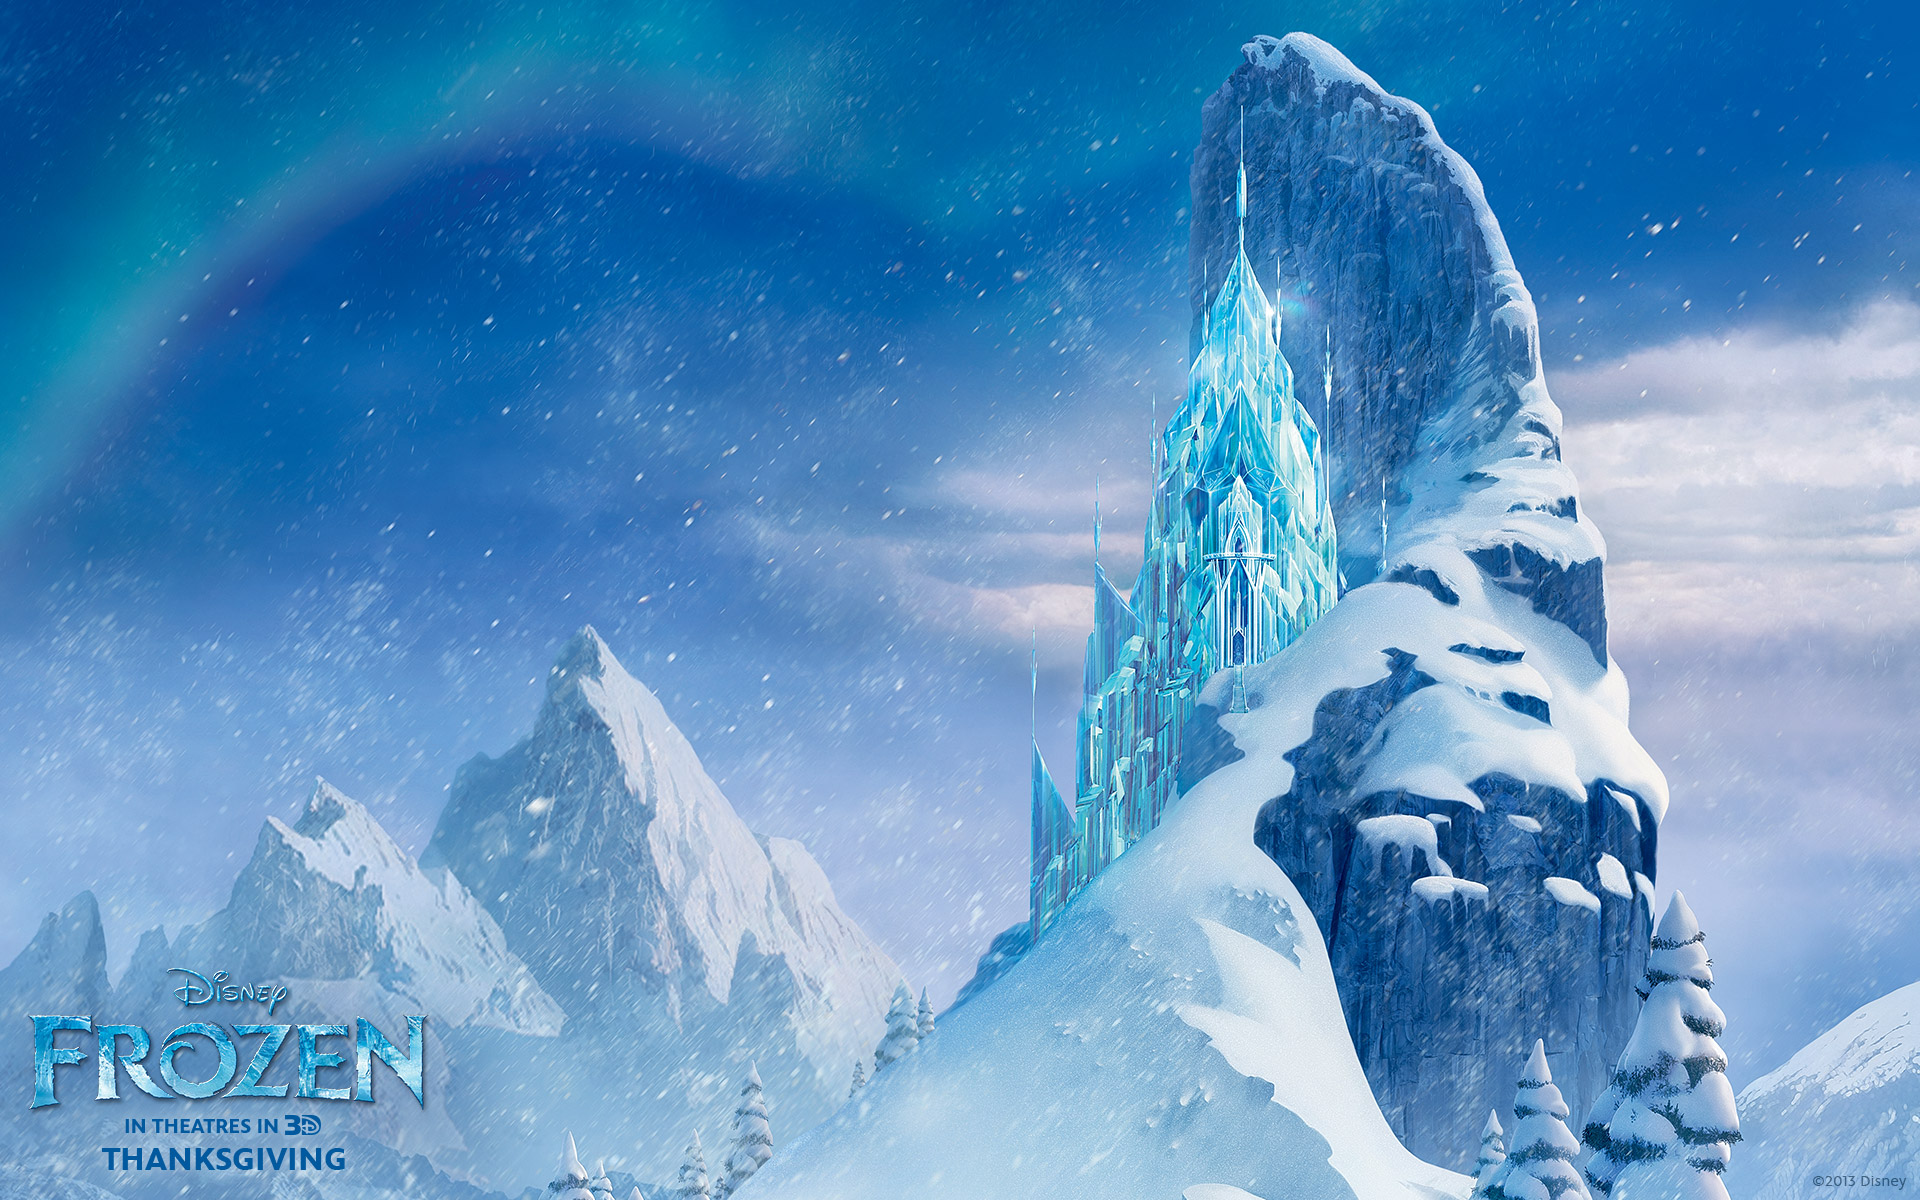  Disneys Frozen CG animated movie wallpaper image background picture